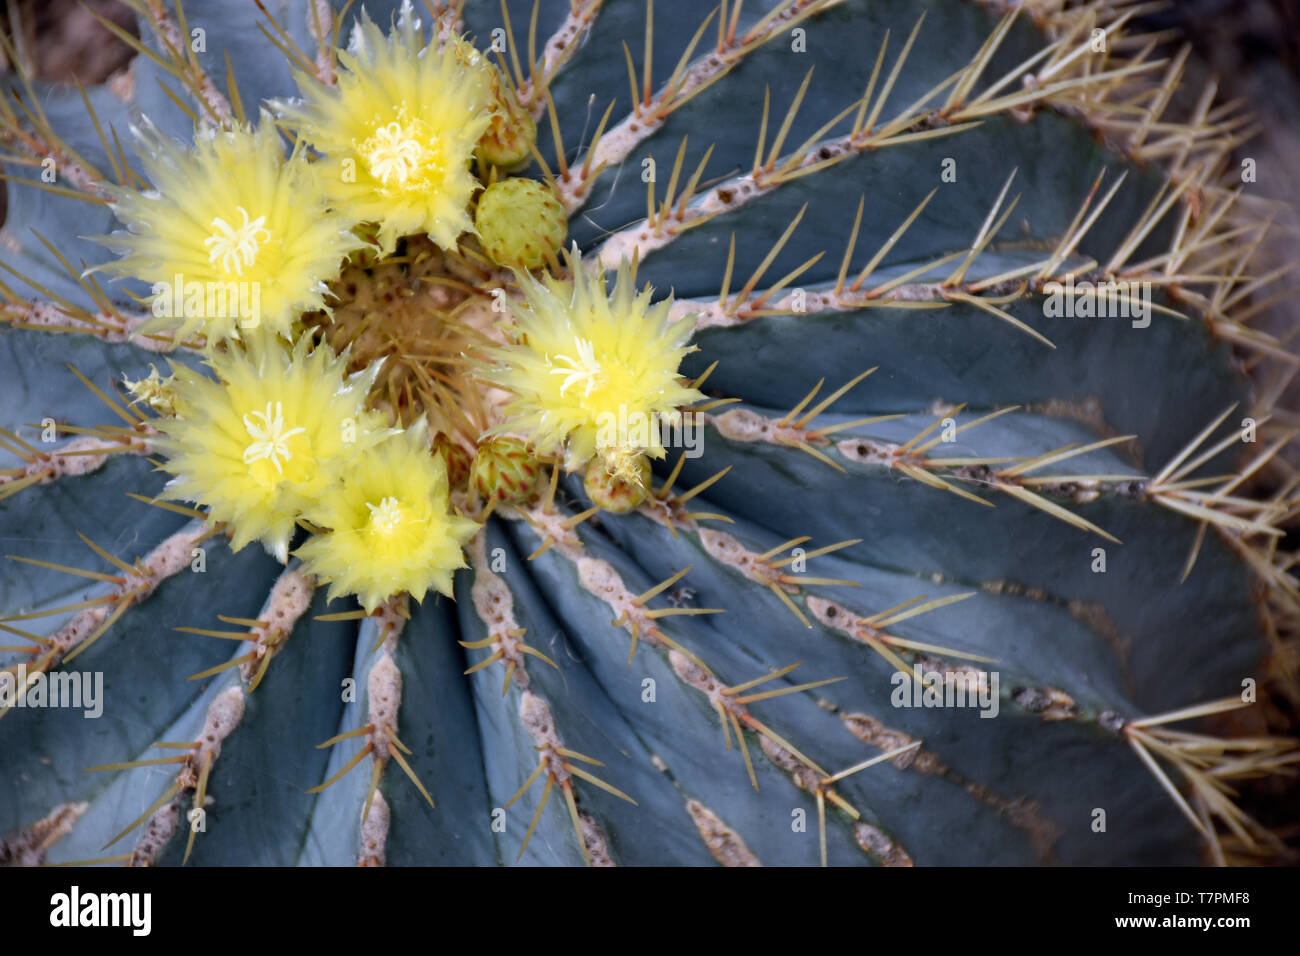 Blue Barrel Cactus from Central Mexico Stock Photo